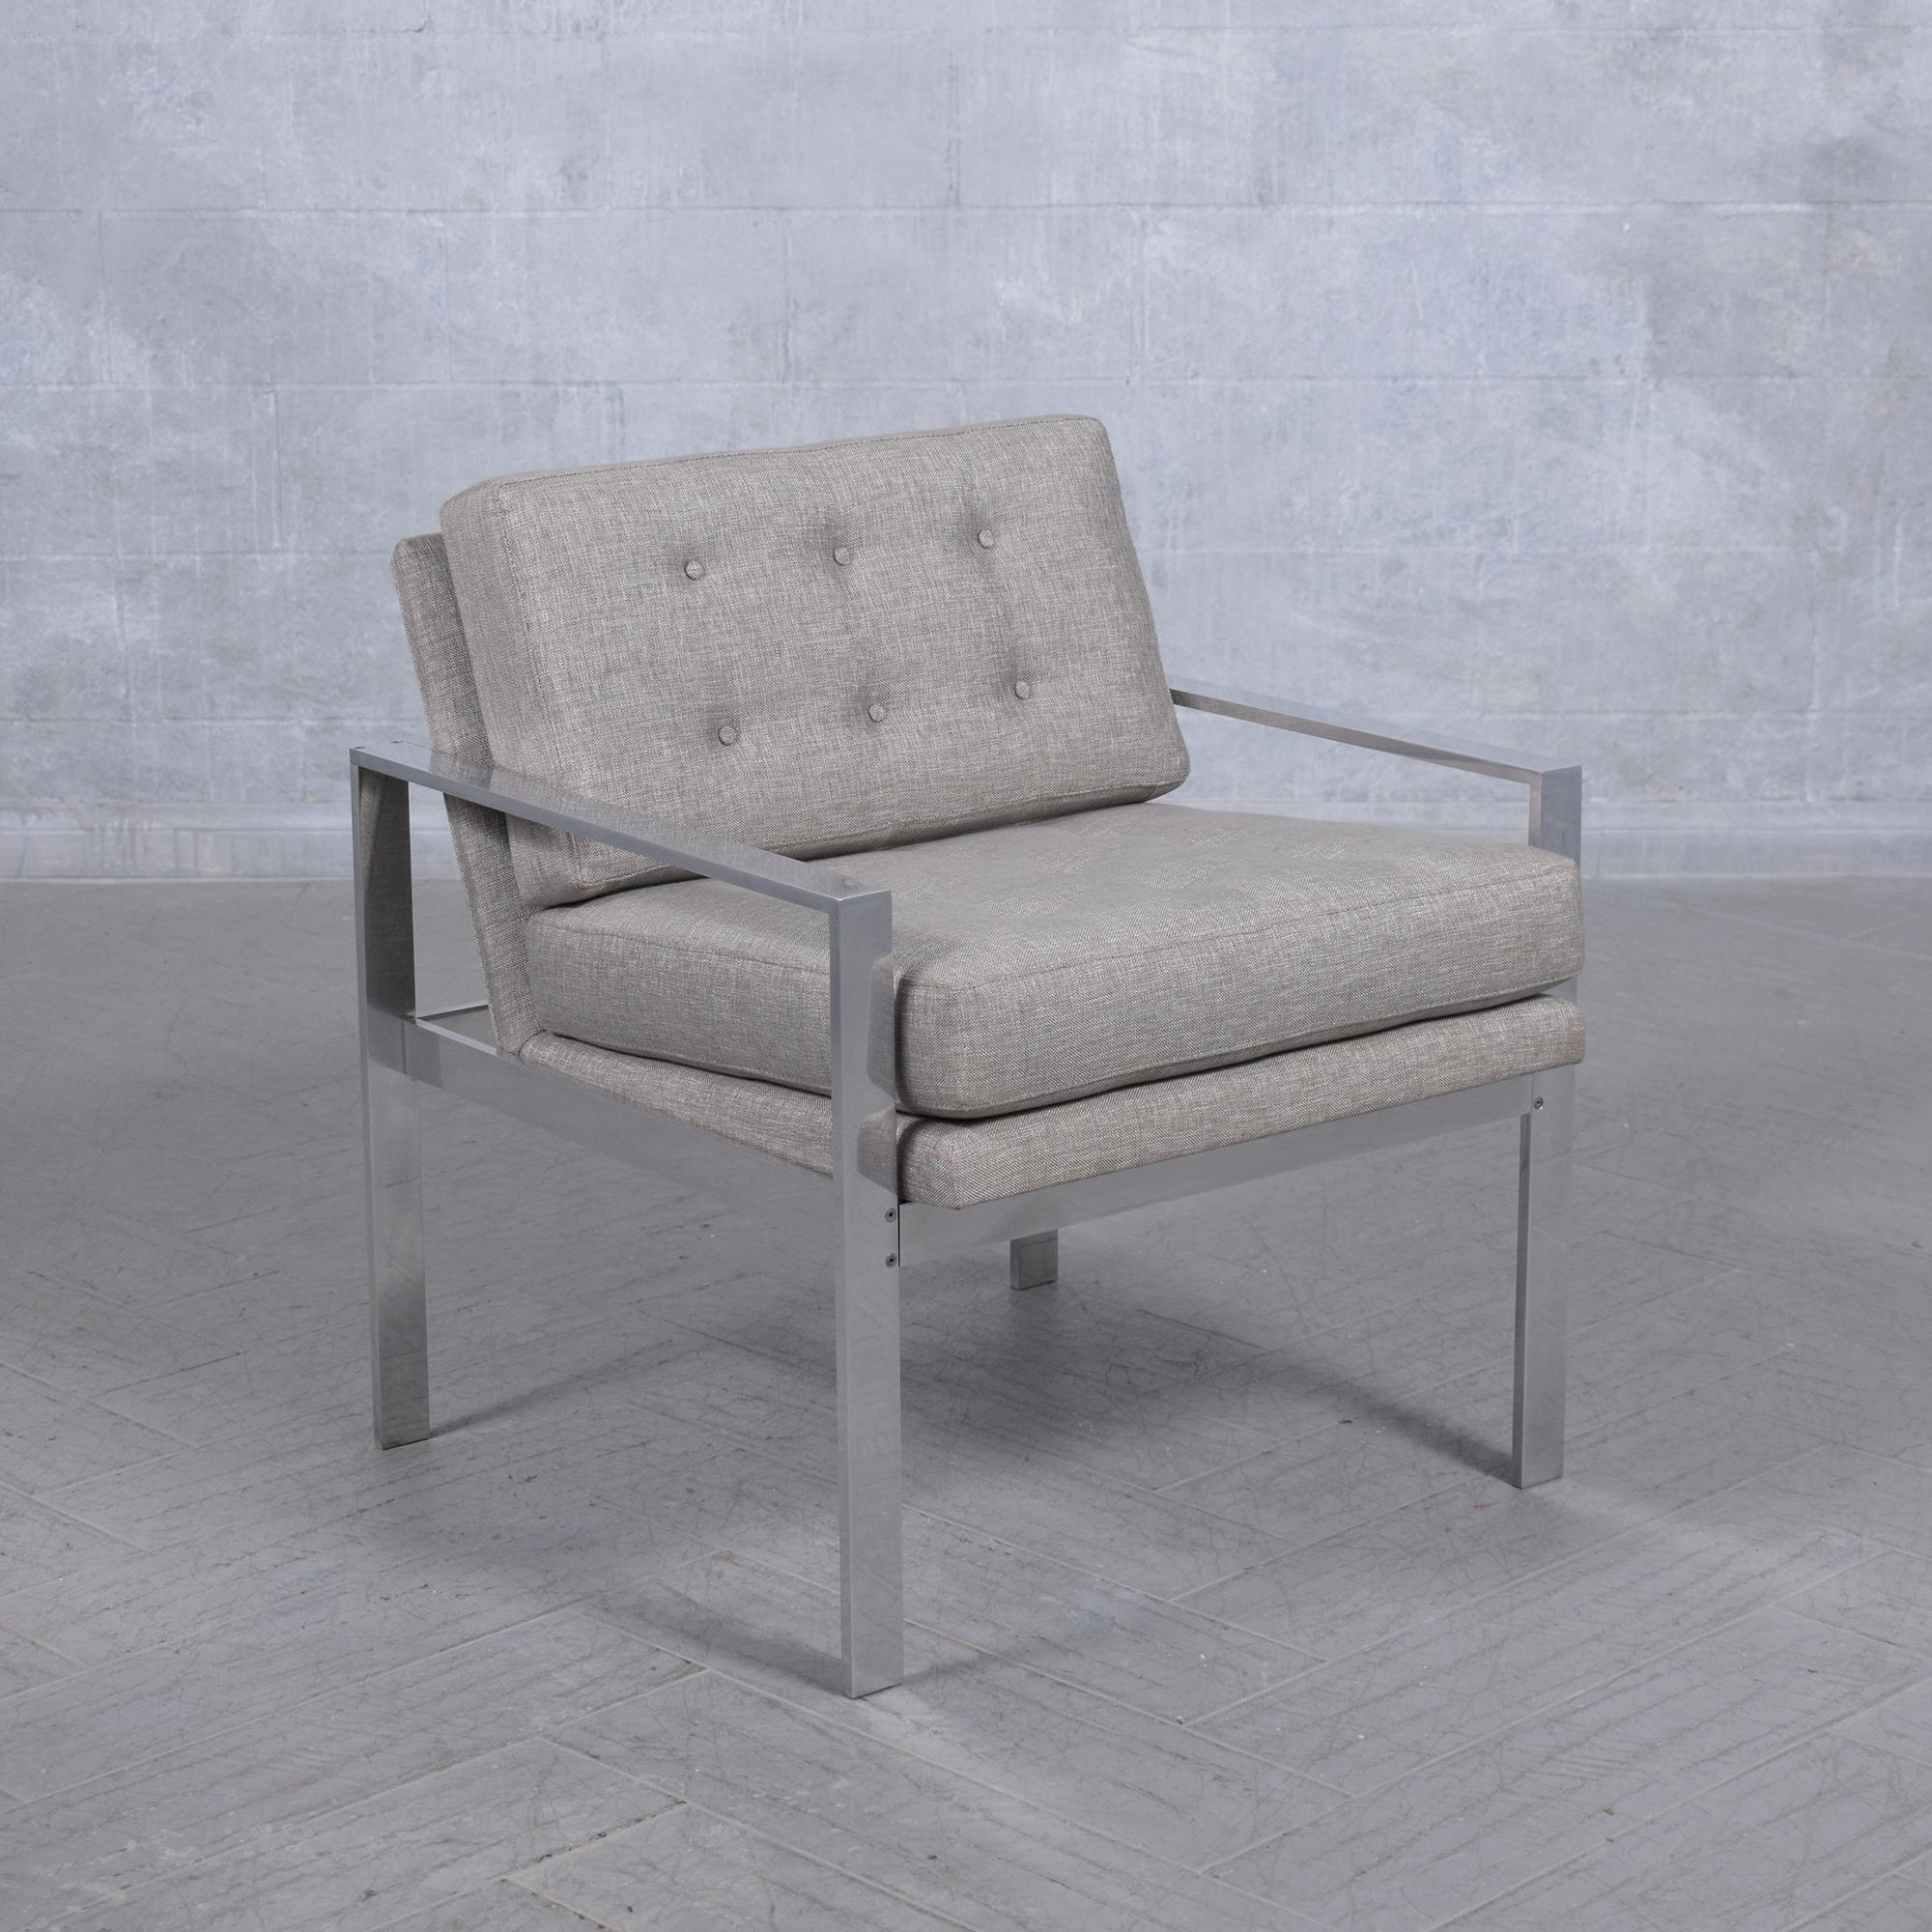 Steel Restored Milo Baughman Lounge Chairs with Polished Aluminum Frames For Sale